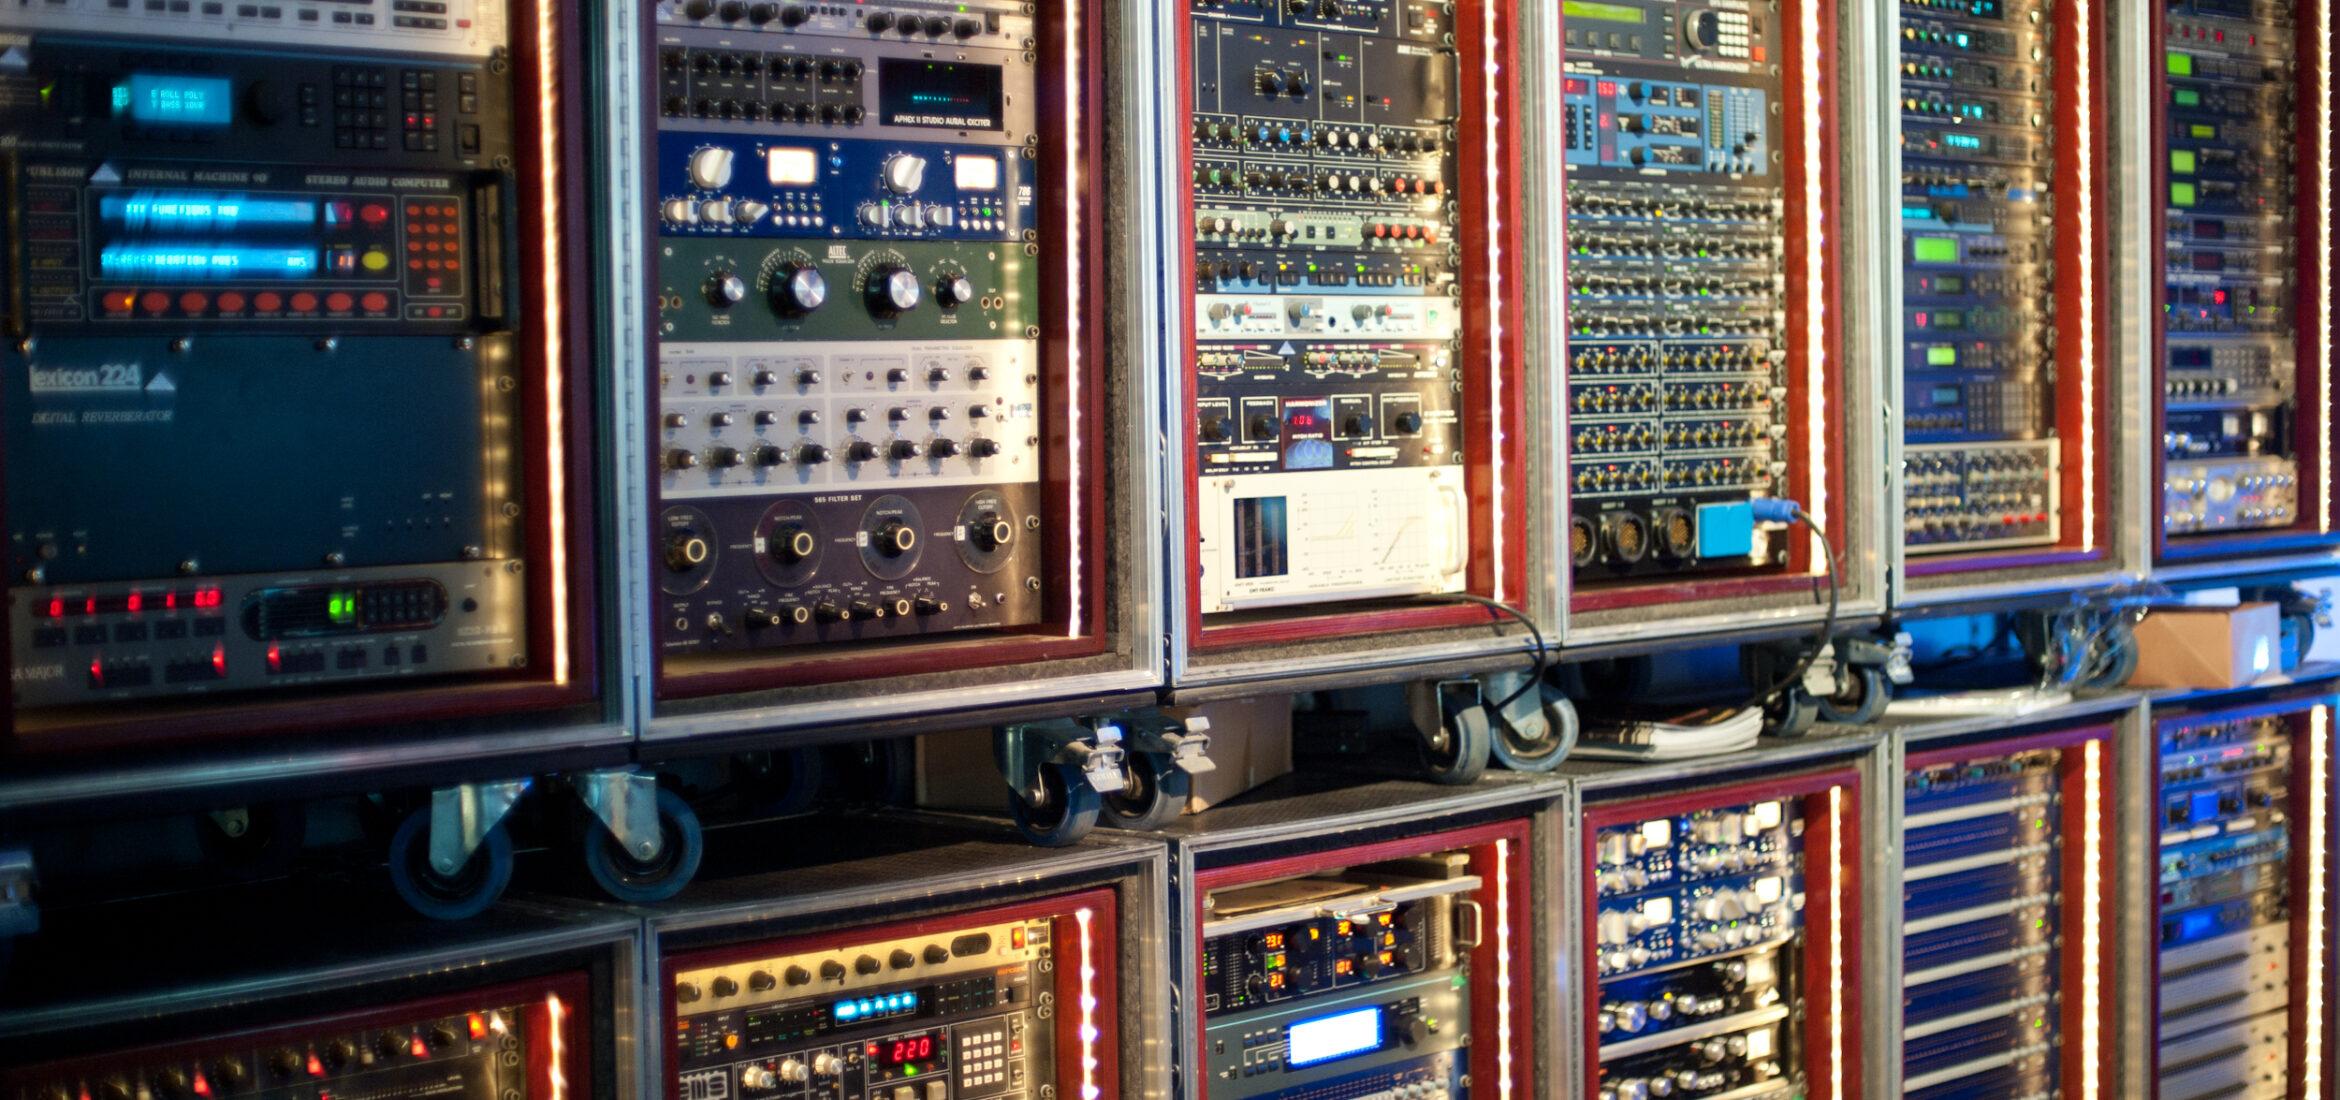 Preamps: Choosing the right gear for the job